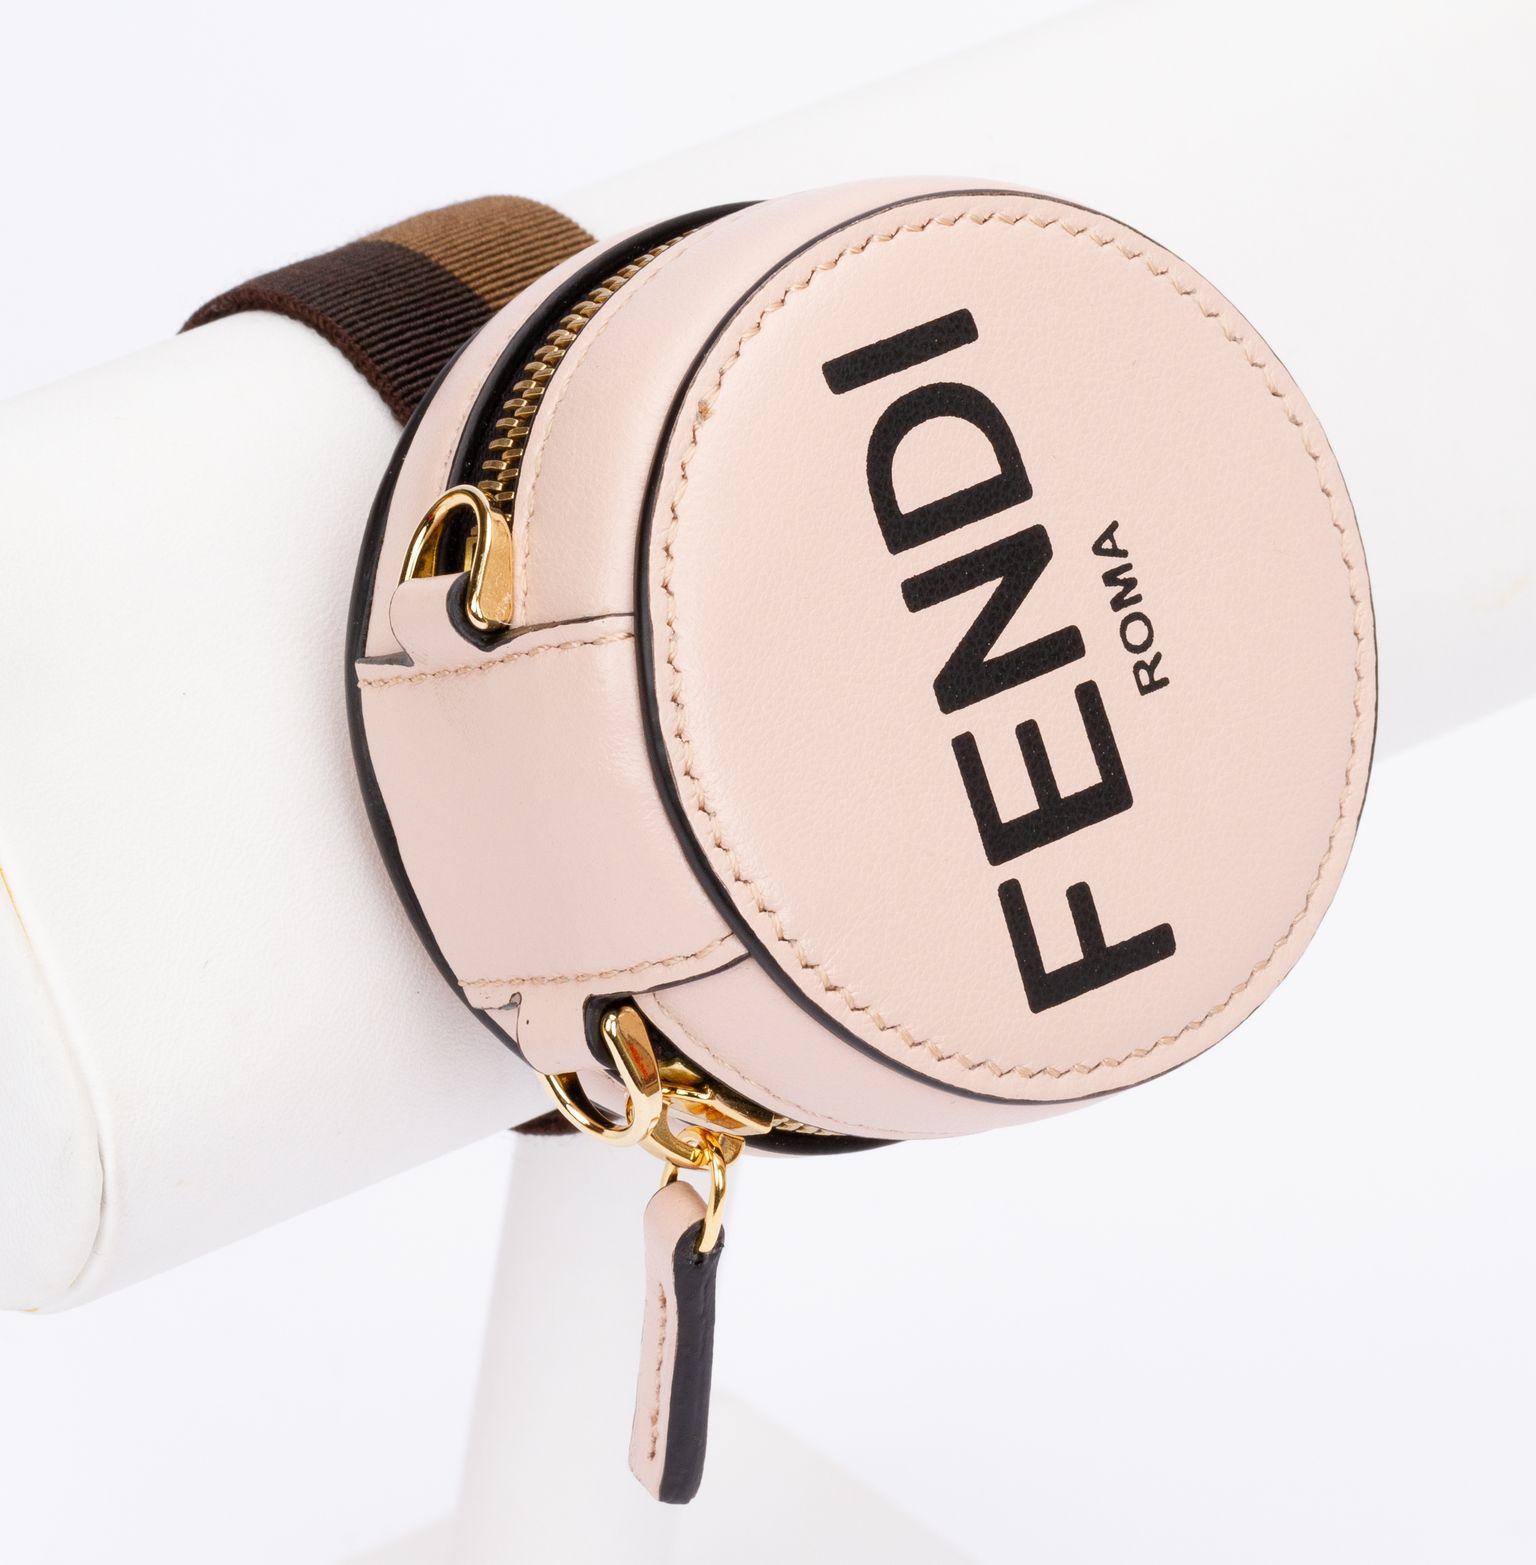 Fendi wrist band with zipped pocket in rosé made of leather. The charm is a round pocket and on top of Fendi is written on it. The pocket can also be used without the wrist band. It is new and includes the original box and dust cover.